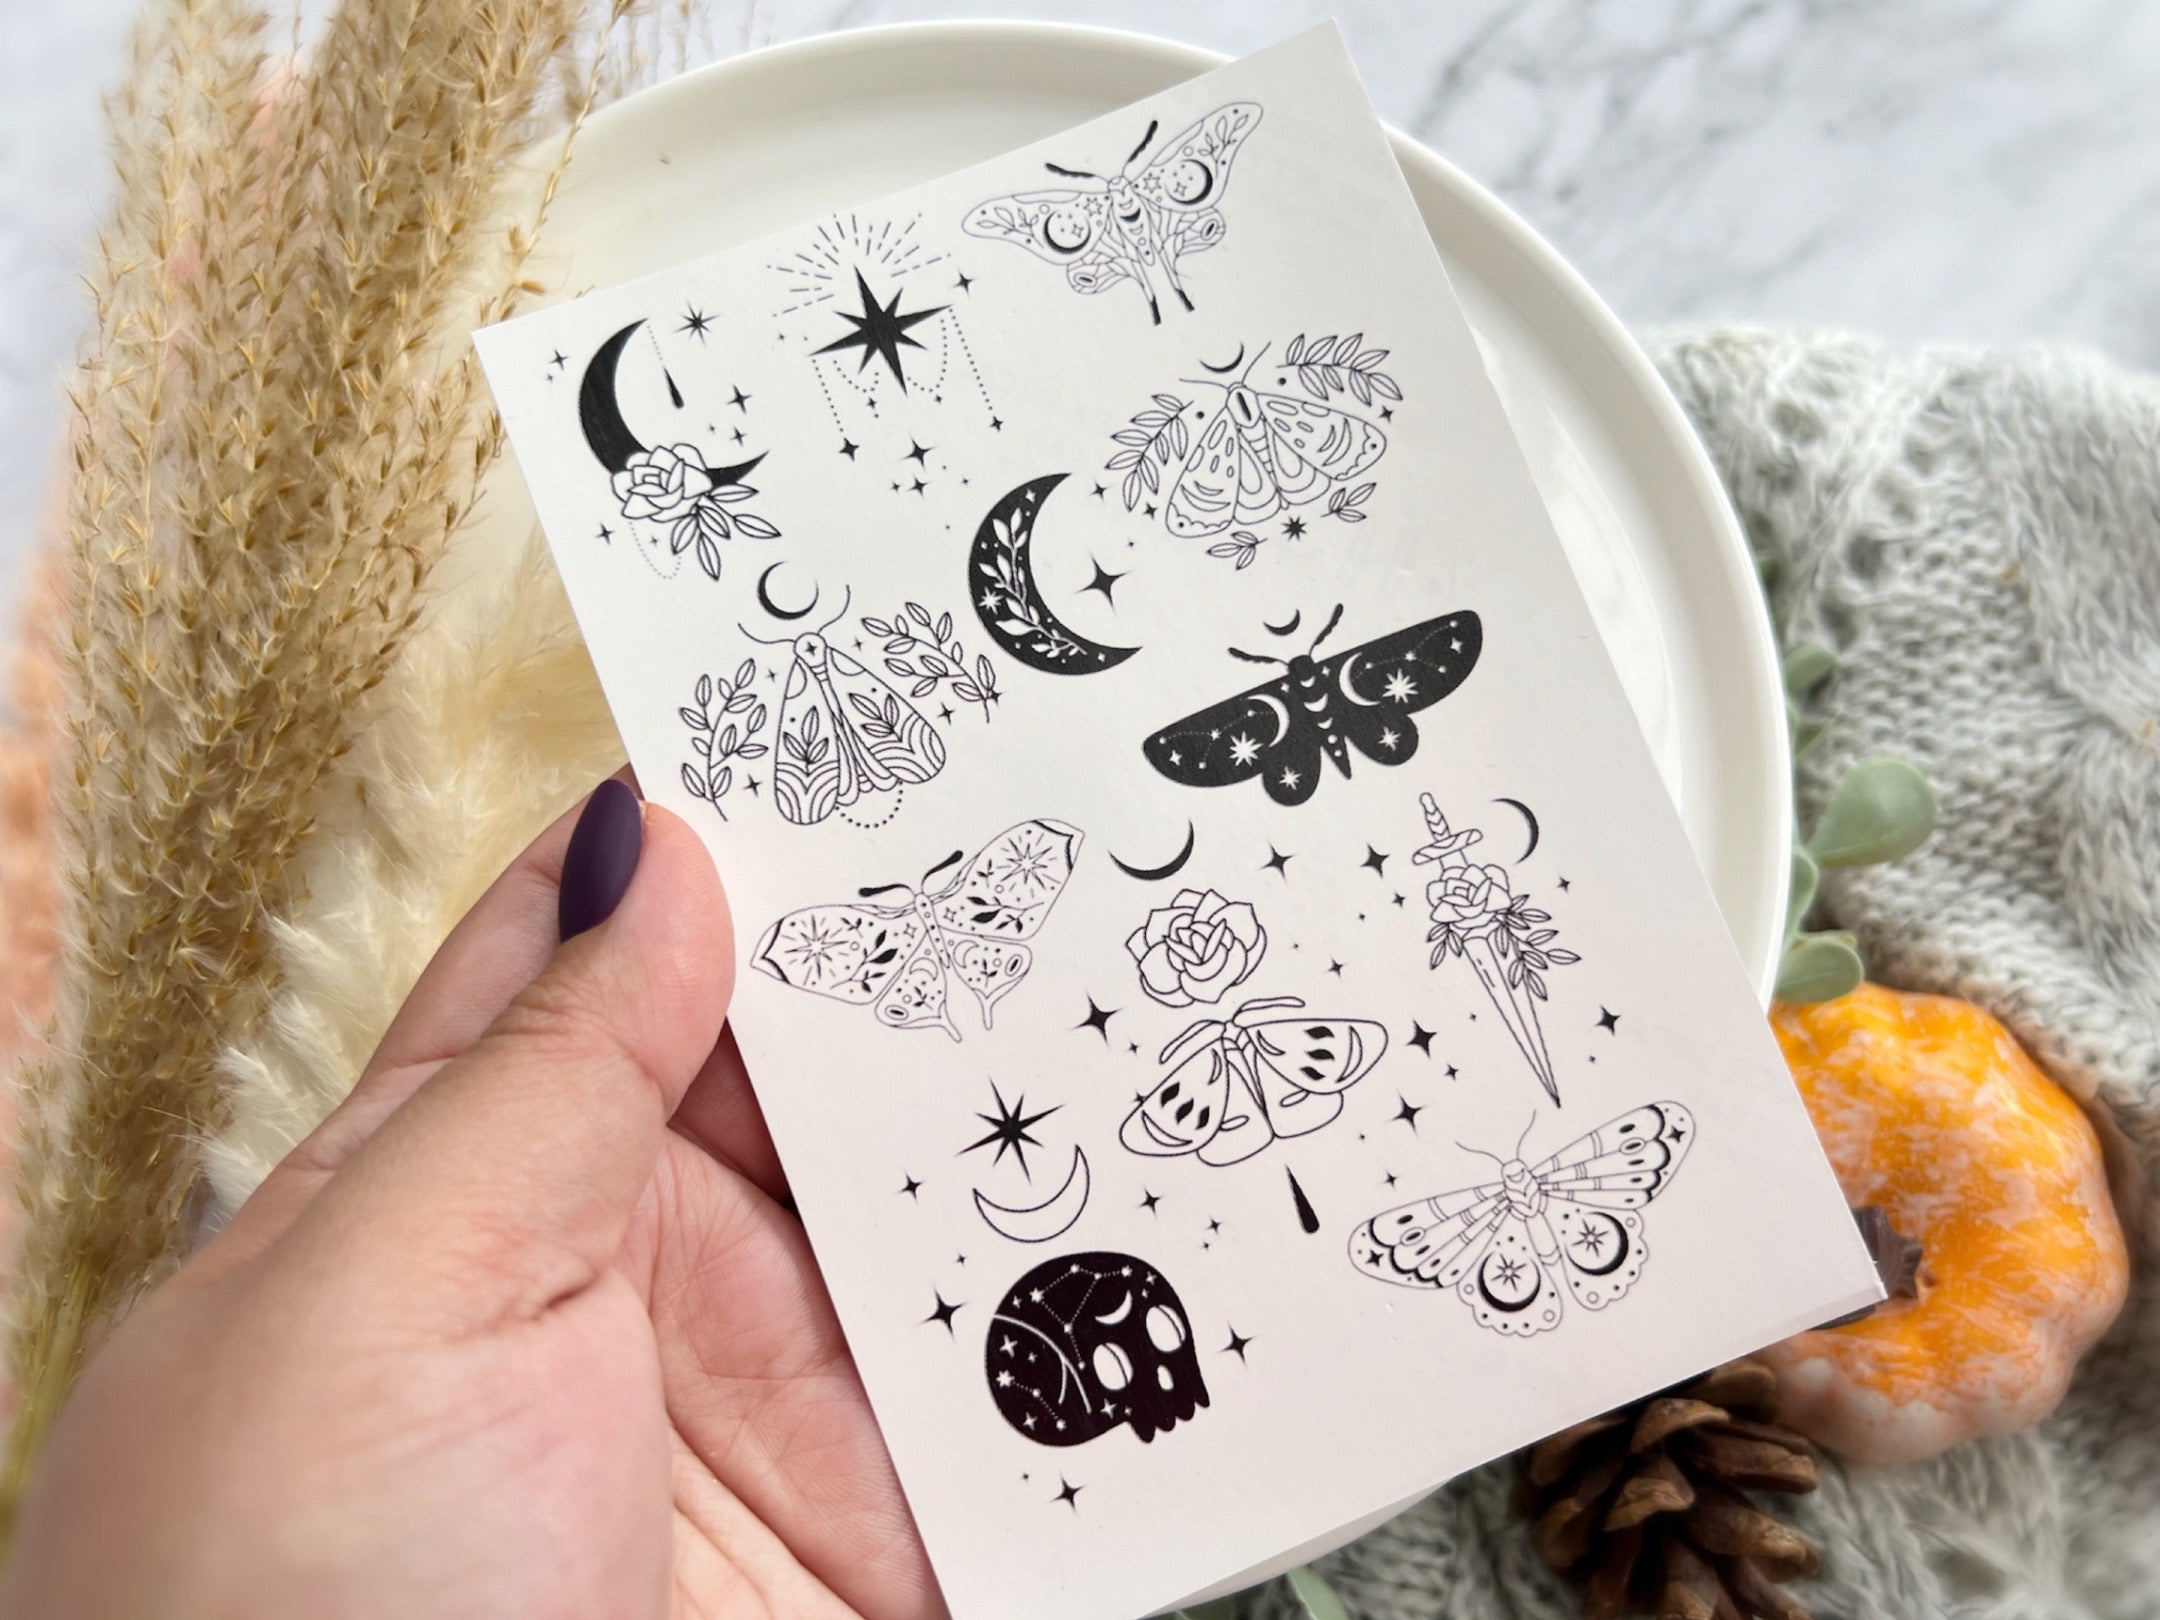 1 Sheet, Approx 14x90cm, Mystical Moth Mystical Themed Water Decal Image Transfer for Polymer Clay / Ceramics